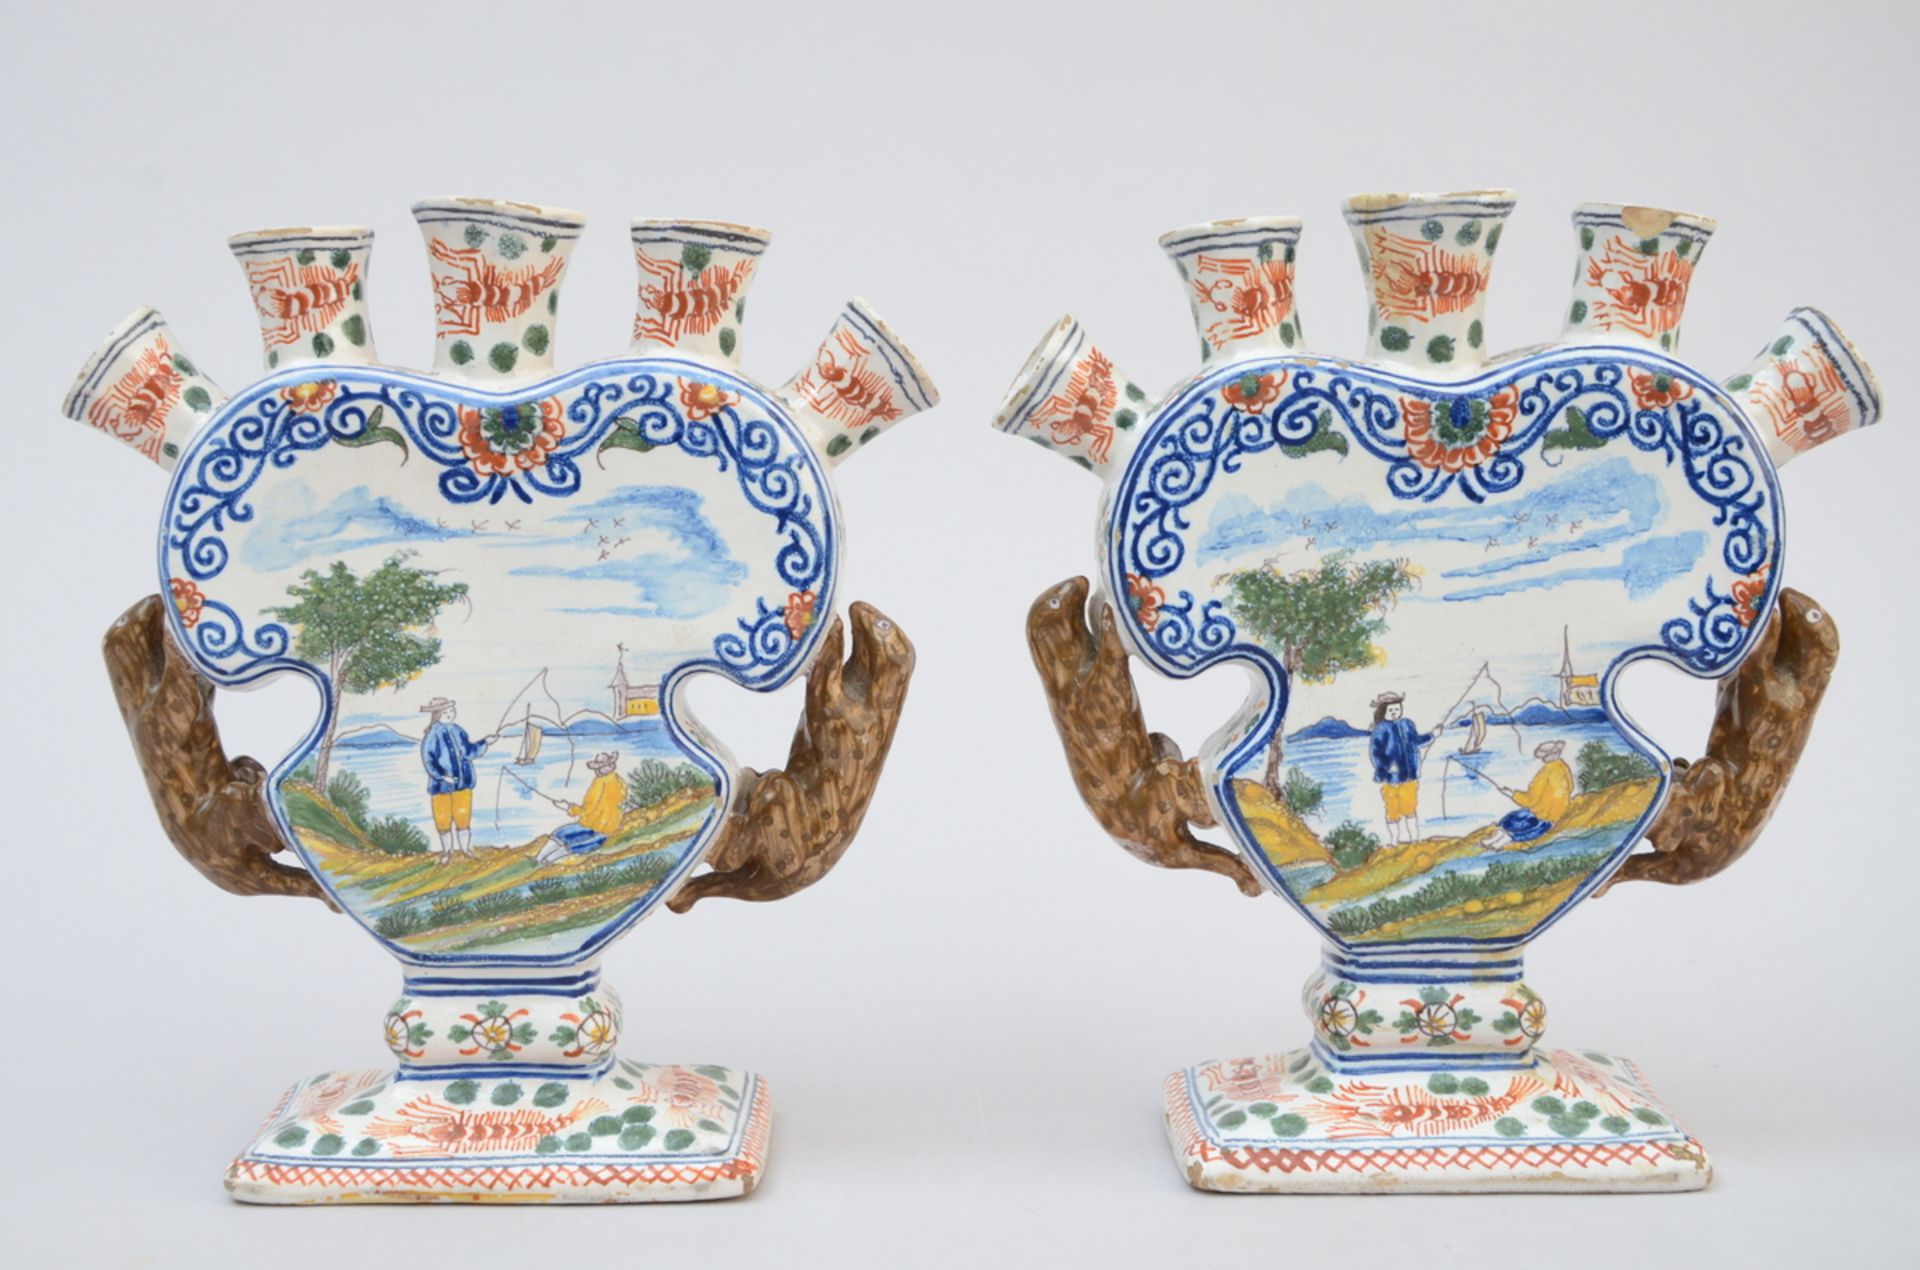 A pair of polychrome tulip vases in faience (21x19x7cm) (*)